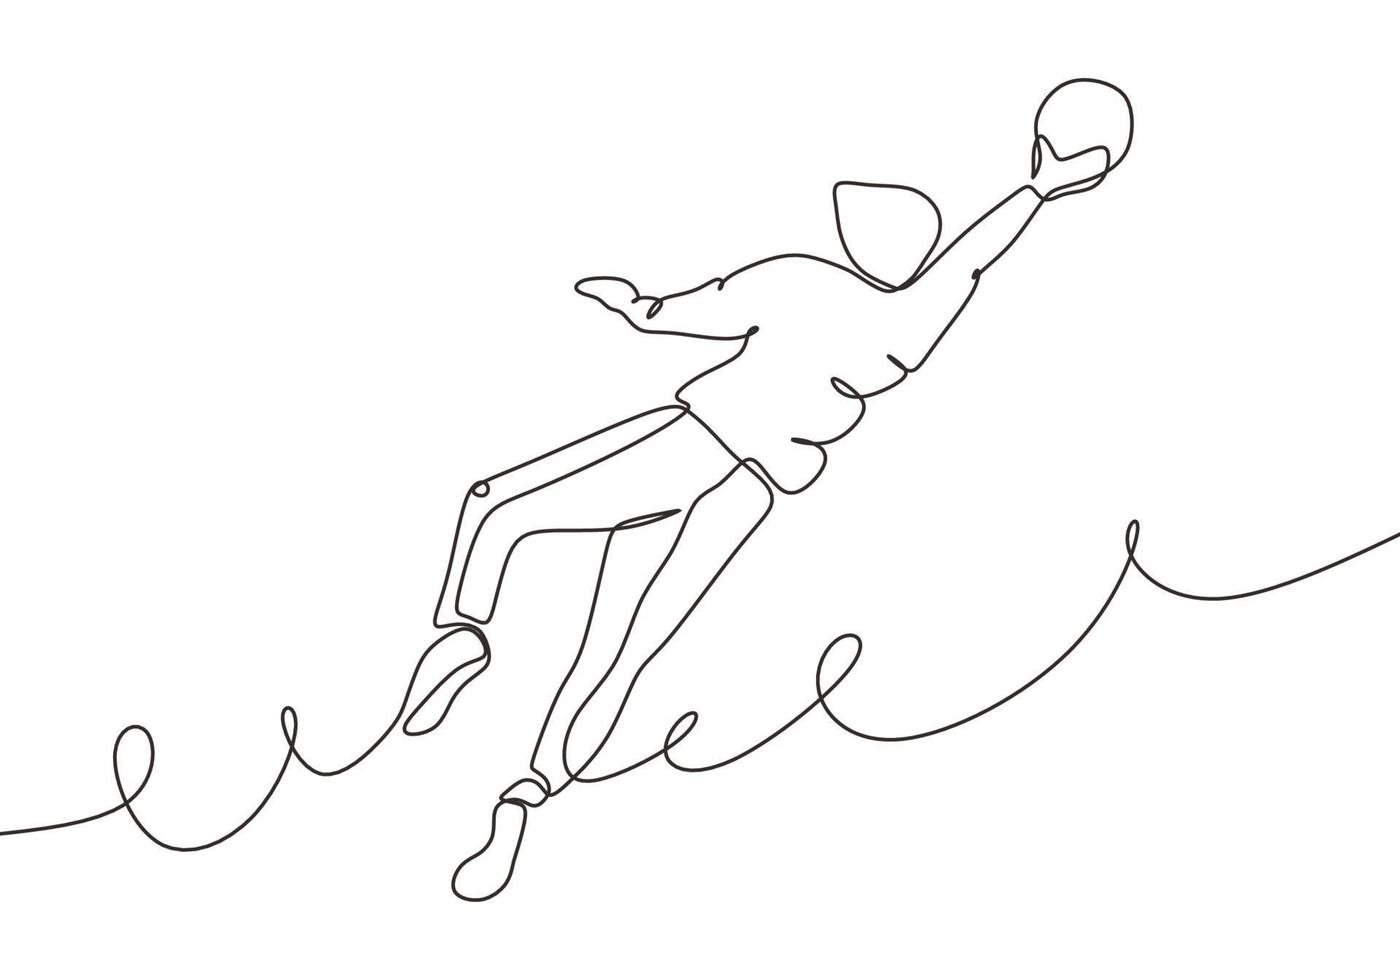 Continuous one line drawing of football player jump and catch the ball vector